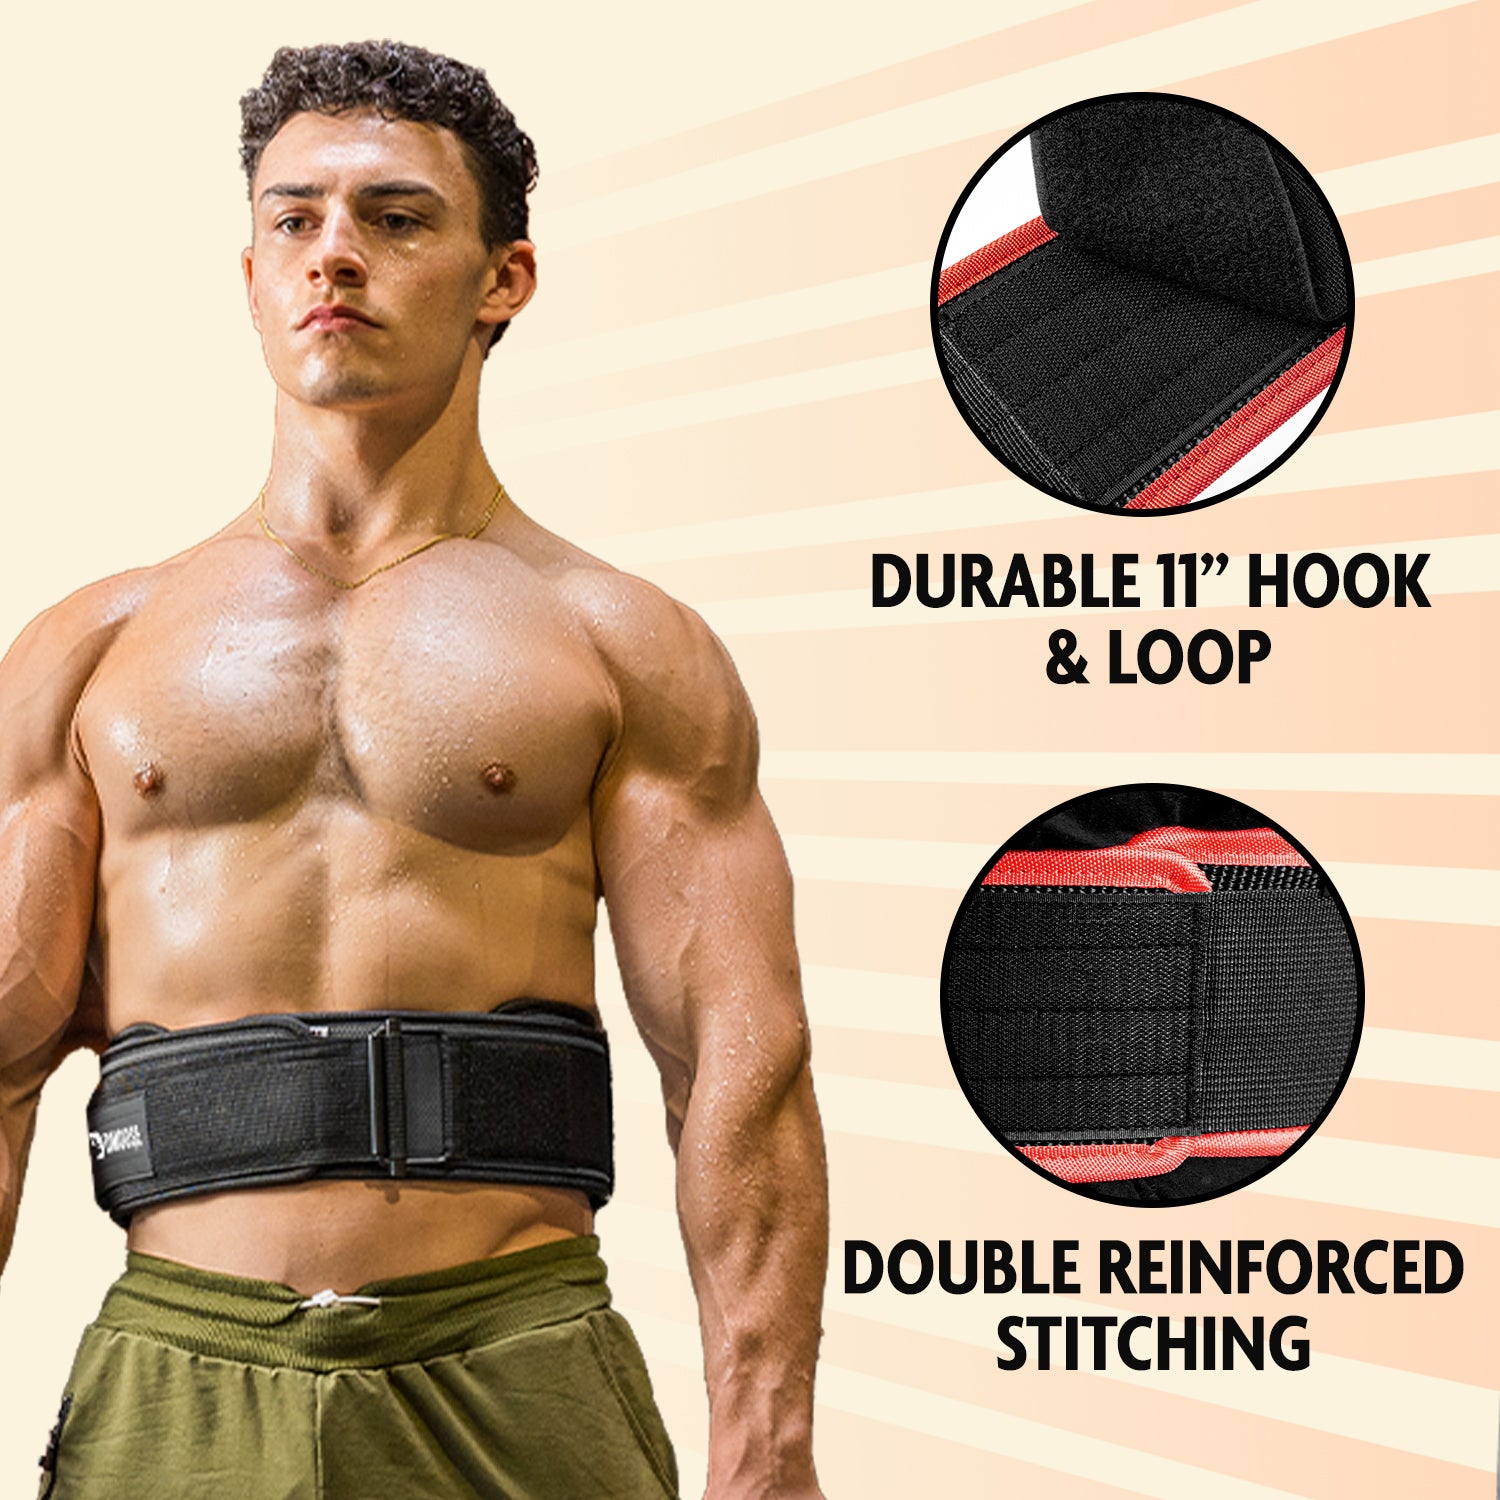 Experience the DMoose Nylon Weightlifting Belt - Lightweight & Durable